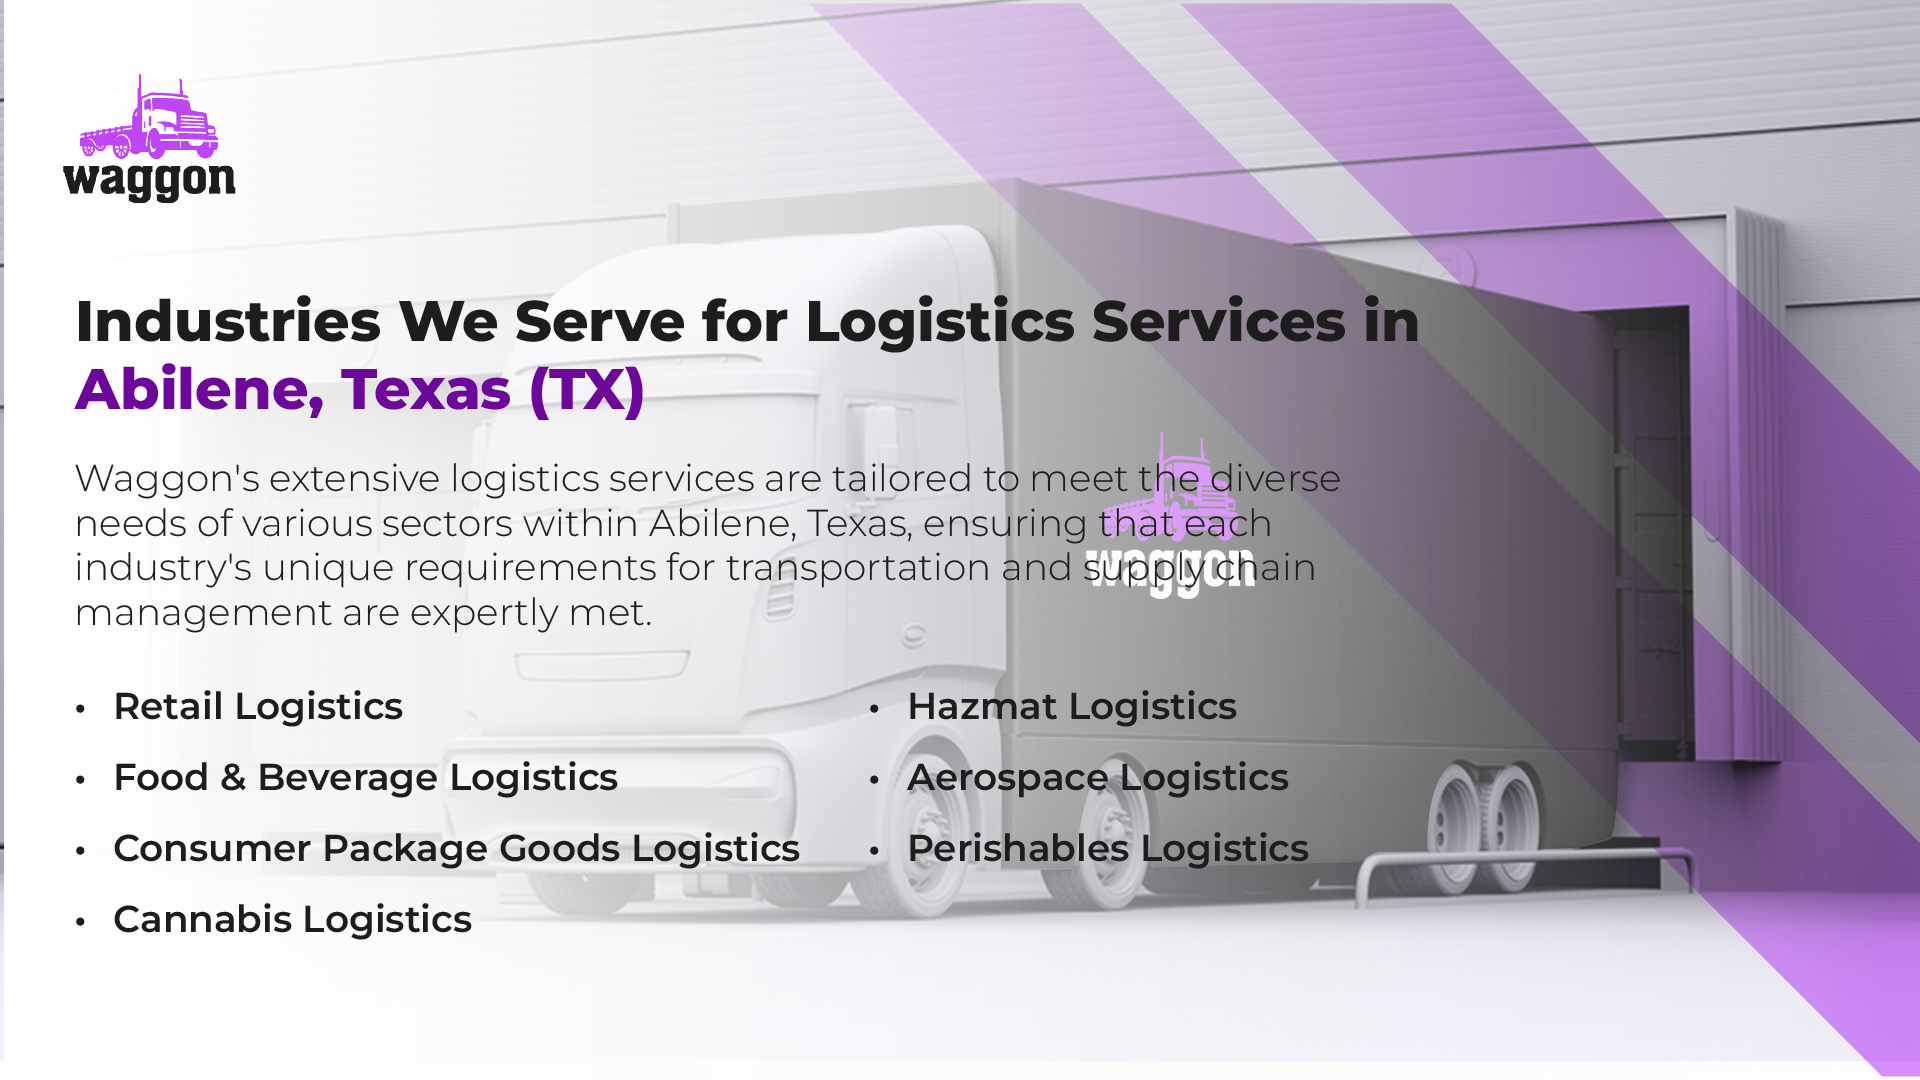 Industries We Serve for Logistics Services in Abilene, Texas (TX)